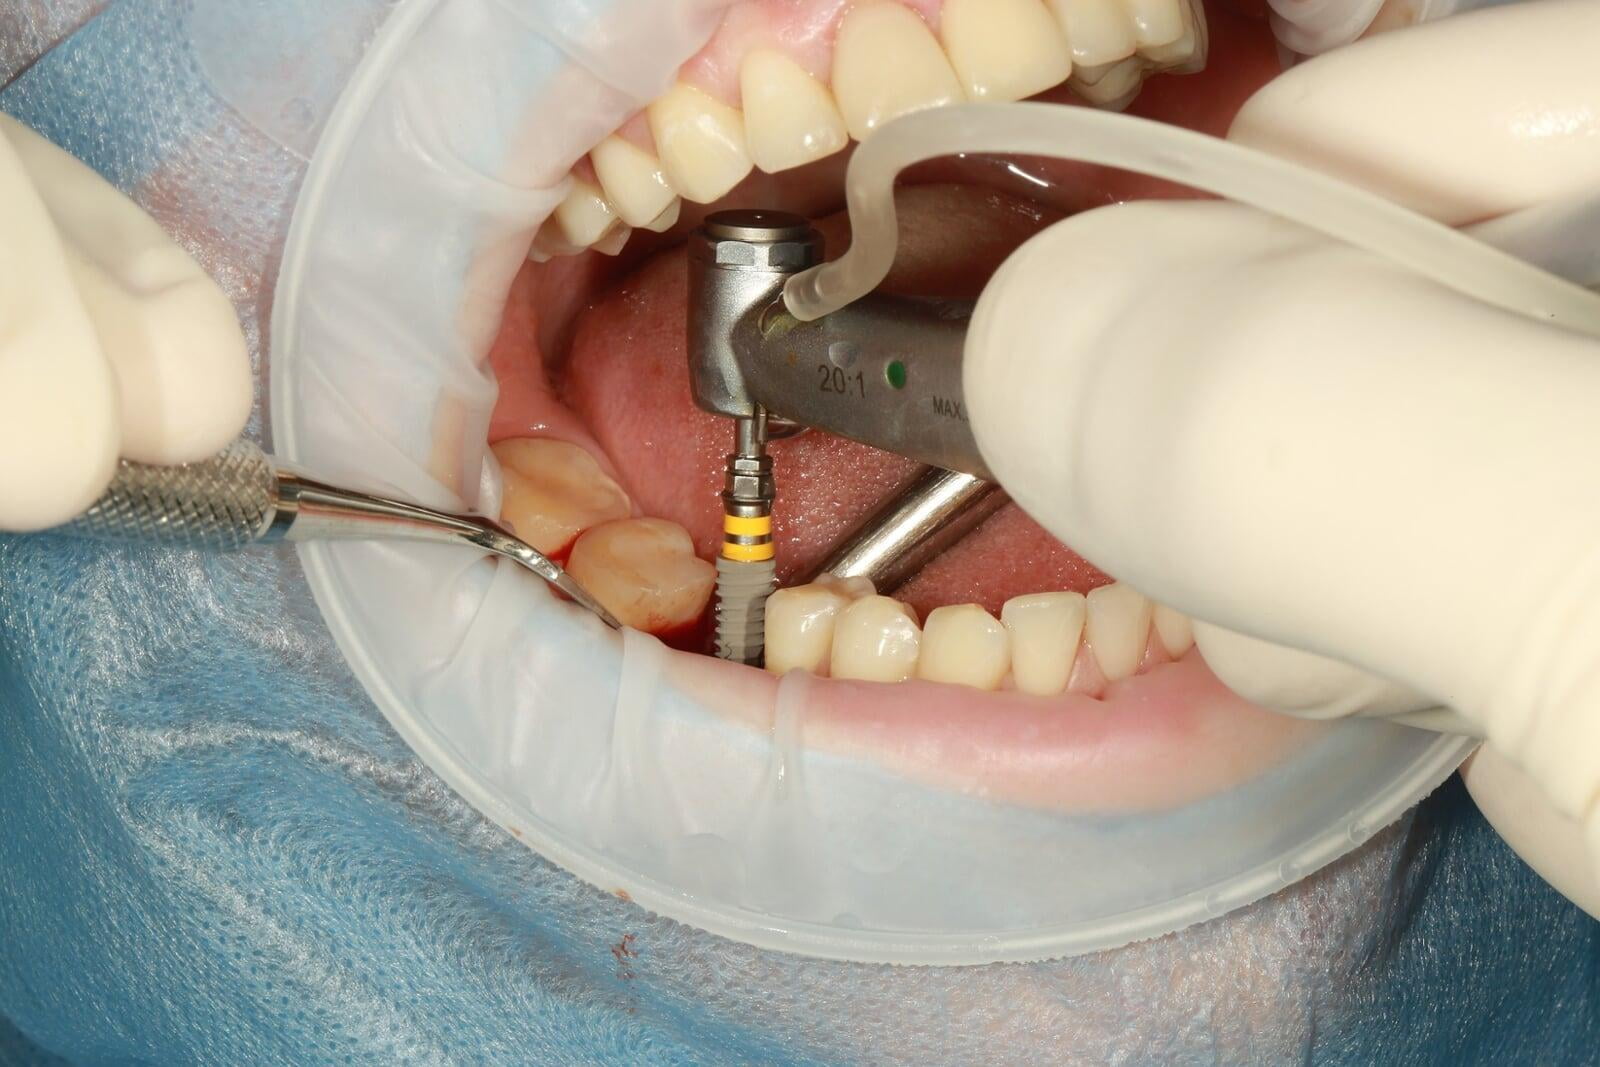 Frequently Asked Questions after Dental Implant Surgery